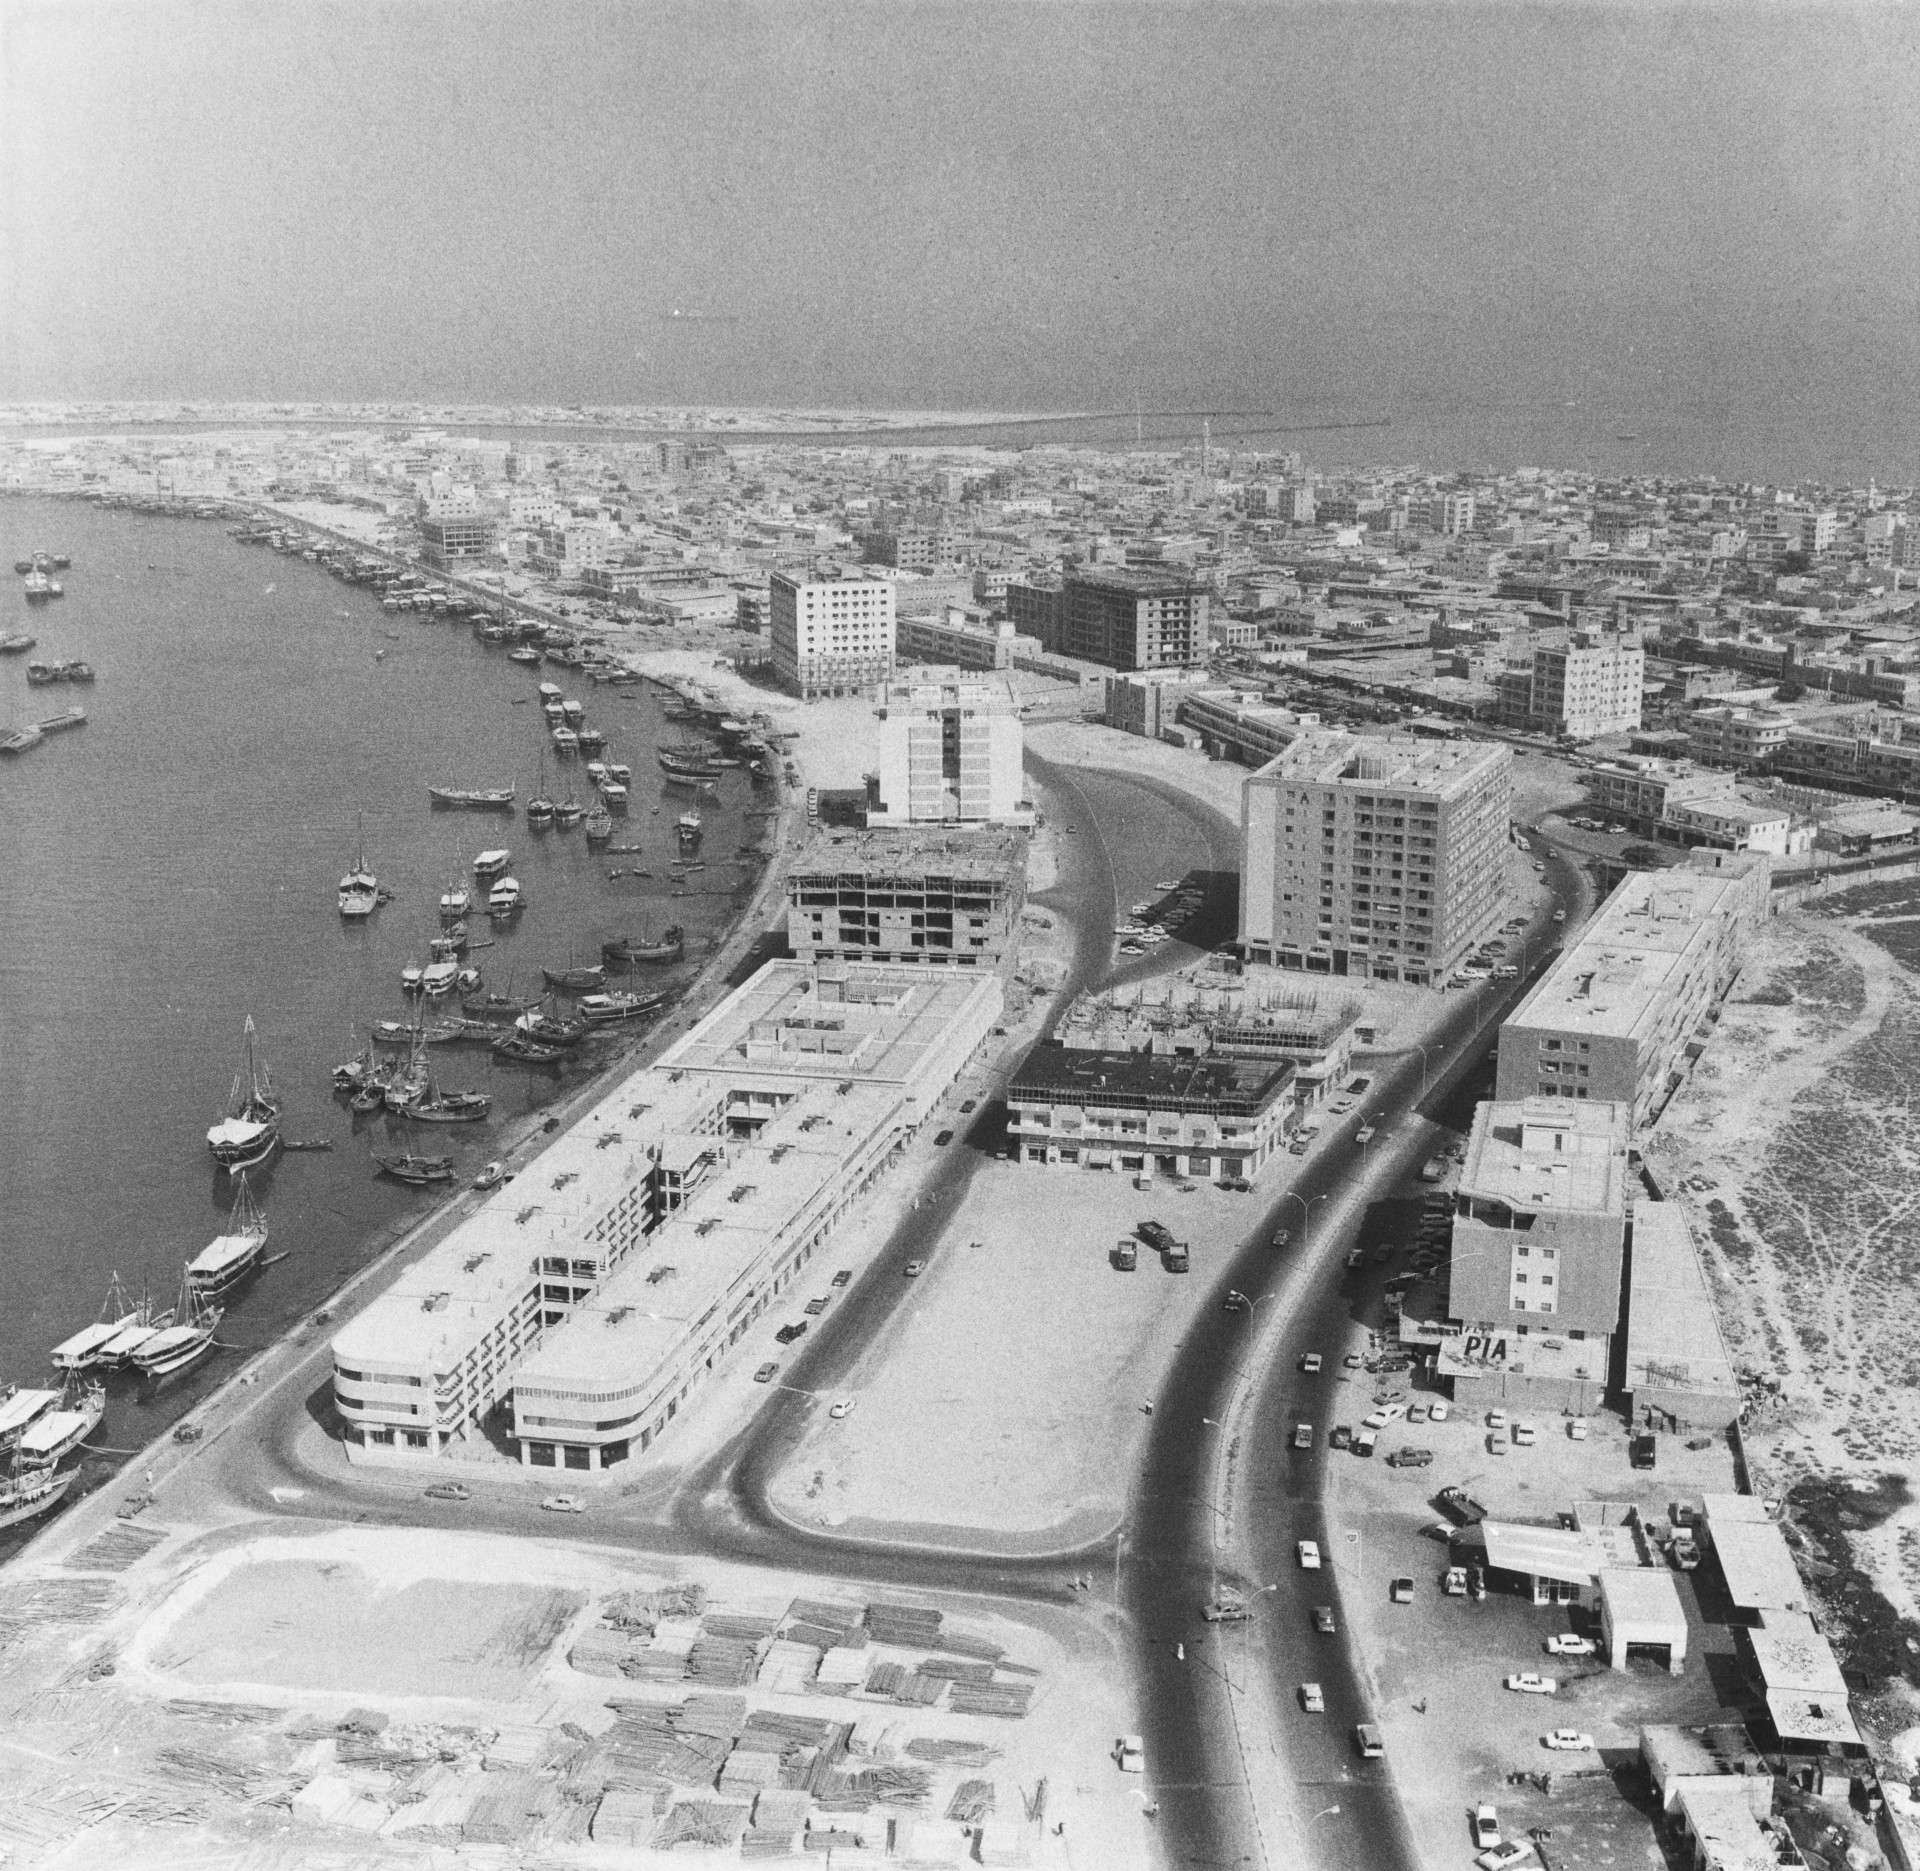 In 1978 the city of Dubai looked like this. Just a few decades later it would become one of the most developed cities in the world.<p><a href="https://www.msn.com/en-us/community/channel/vid-7xx8mnucu55yw63we9va2gwr7uihbxwc68fxqp25x6tg4ftibpra?cvid=94631541bc0f4f89bfd59158d696ad7e">Follow us and access great exclusive content every day</a></p>